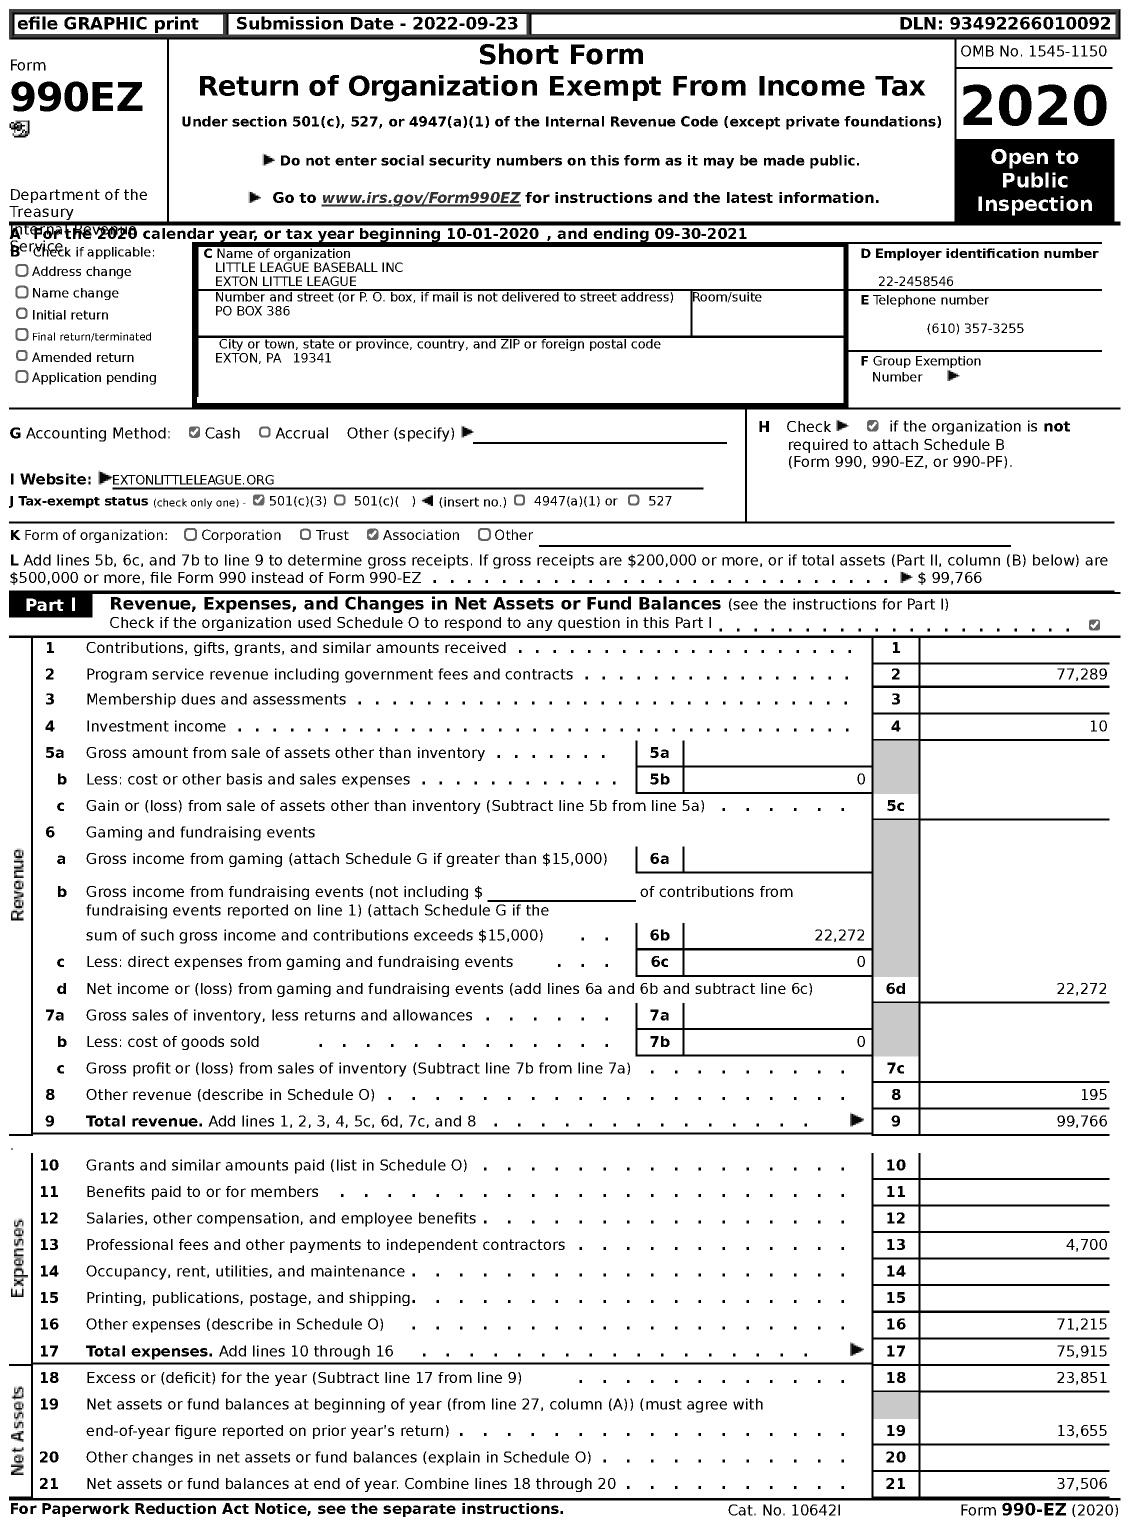 Image of first page of 2020 Form 990EZ for Little League Baseball - 2382706 Exton LL